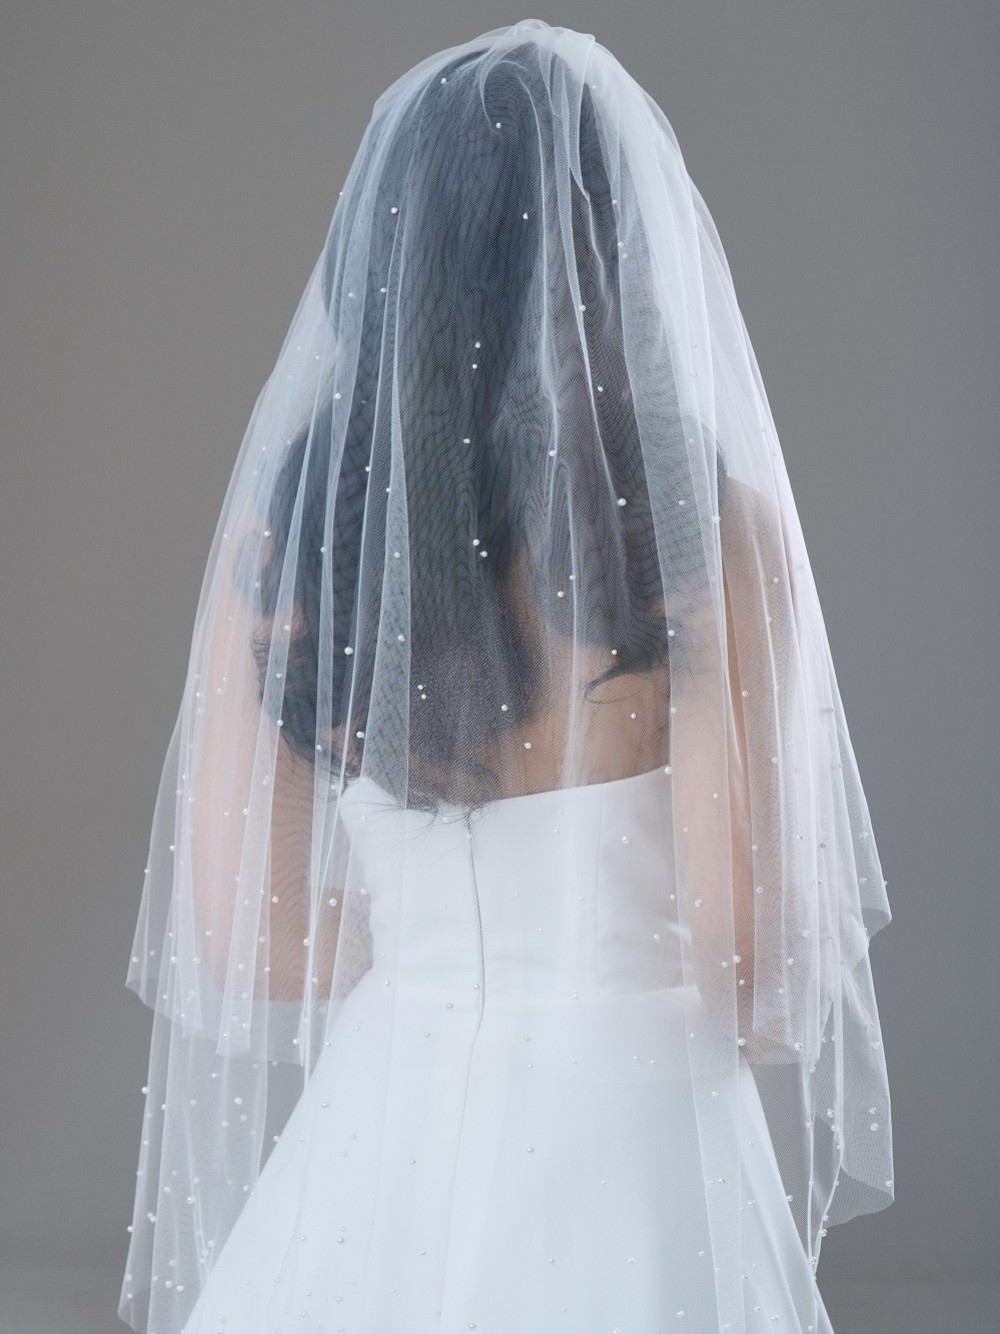 Photograph: Bellavue Ivory Two Tier Scattered Pearl Veil with Cut Edge